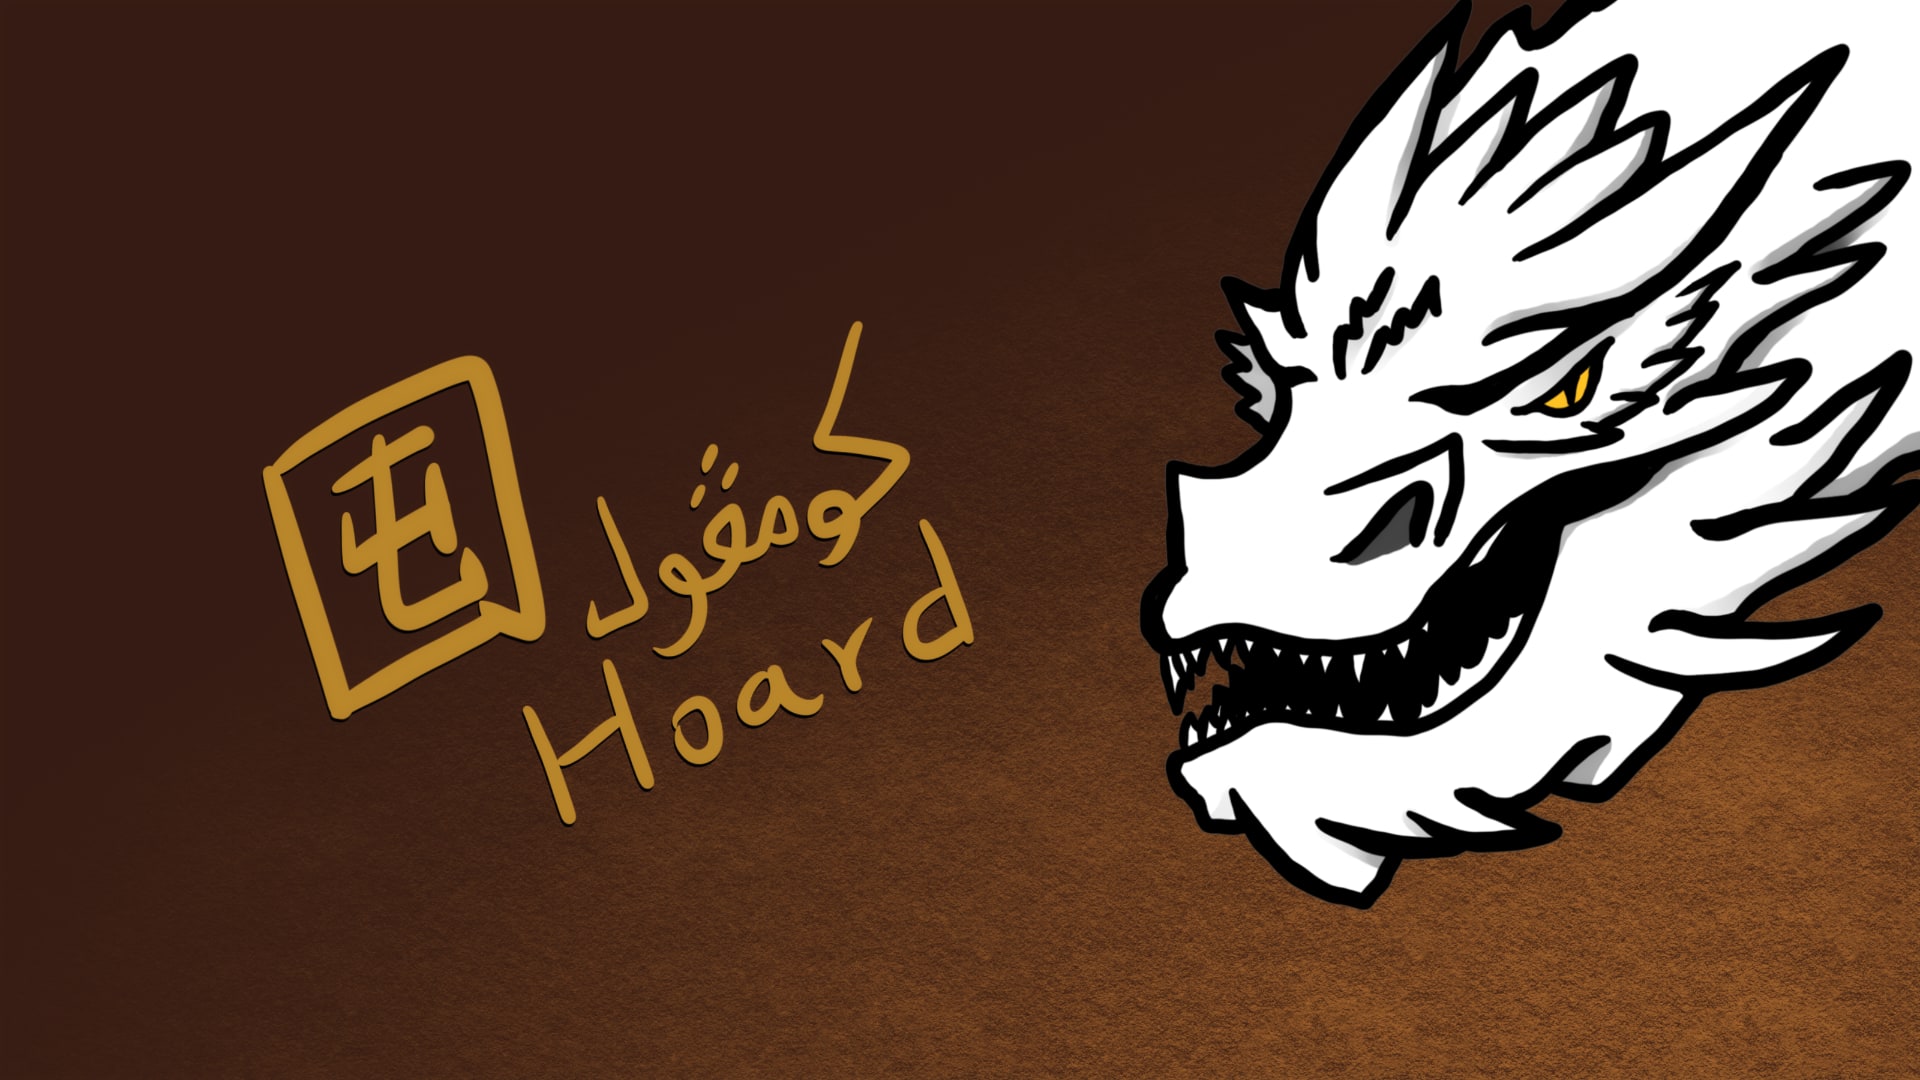 A doodle of Smaug from The Hobbit with the word hoard in Chinese, Malay, and English on the left.